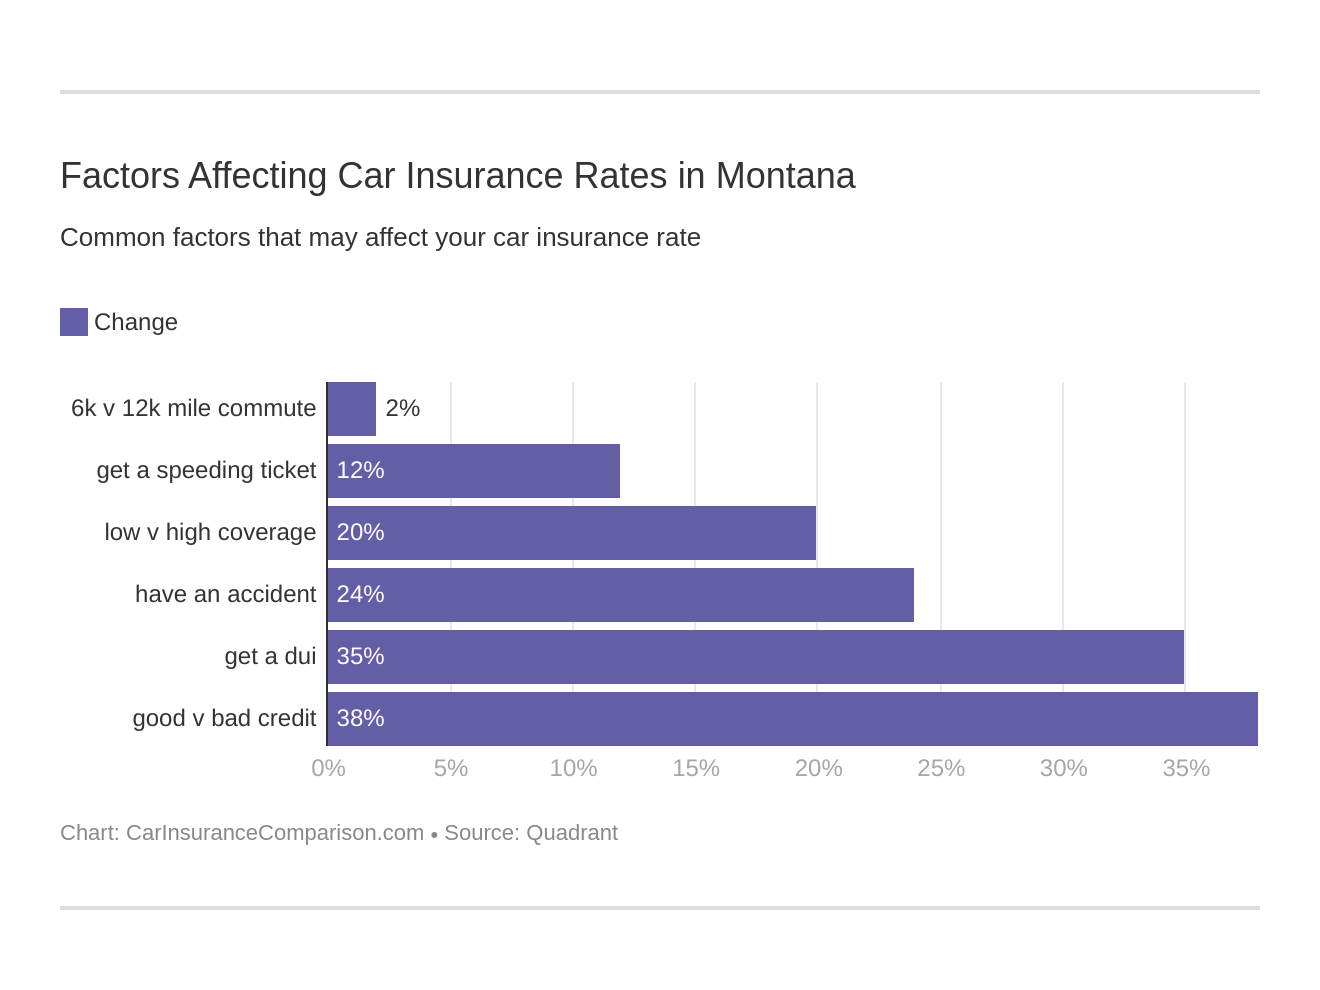 Montana Auto Insurance Rates Proven Guide within dimensions 1320 X 990